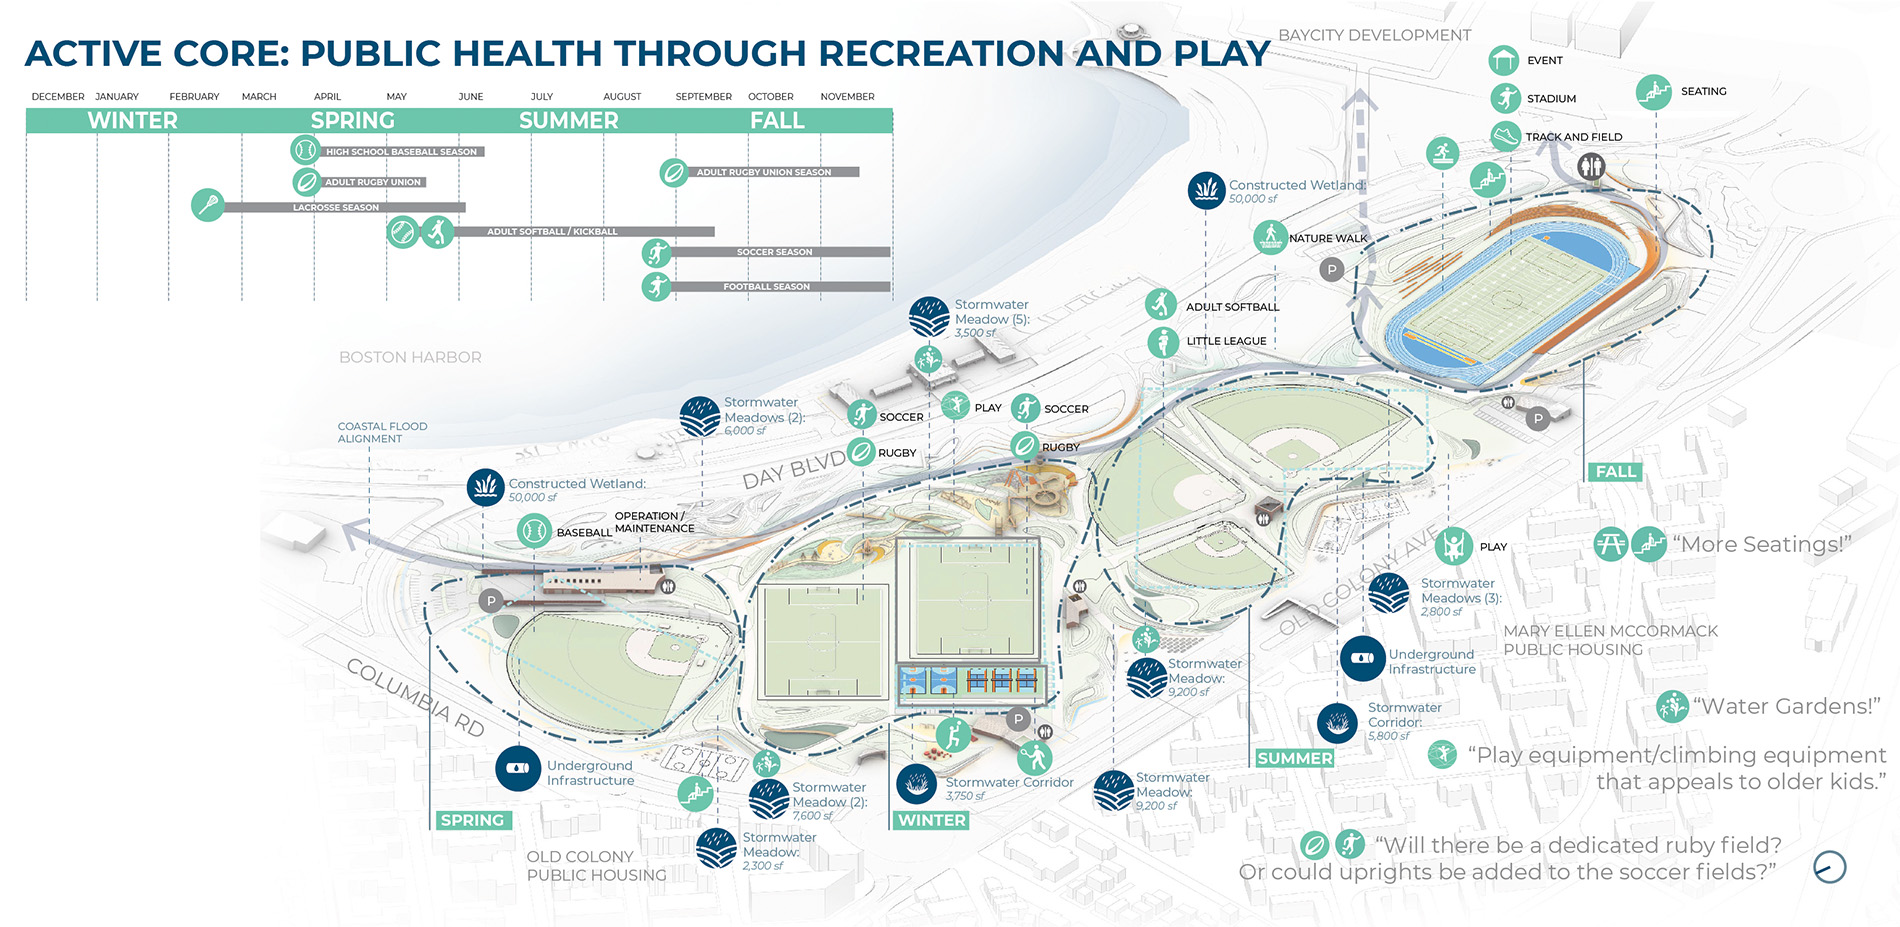 Active Core: Public Health Through Recreation and Play